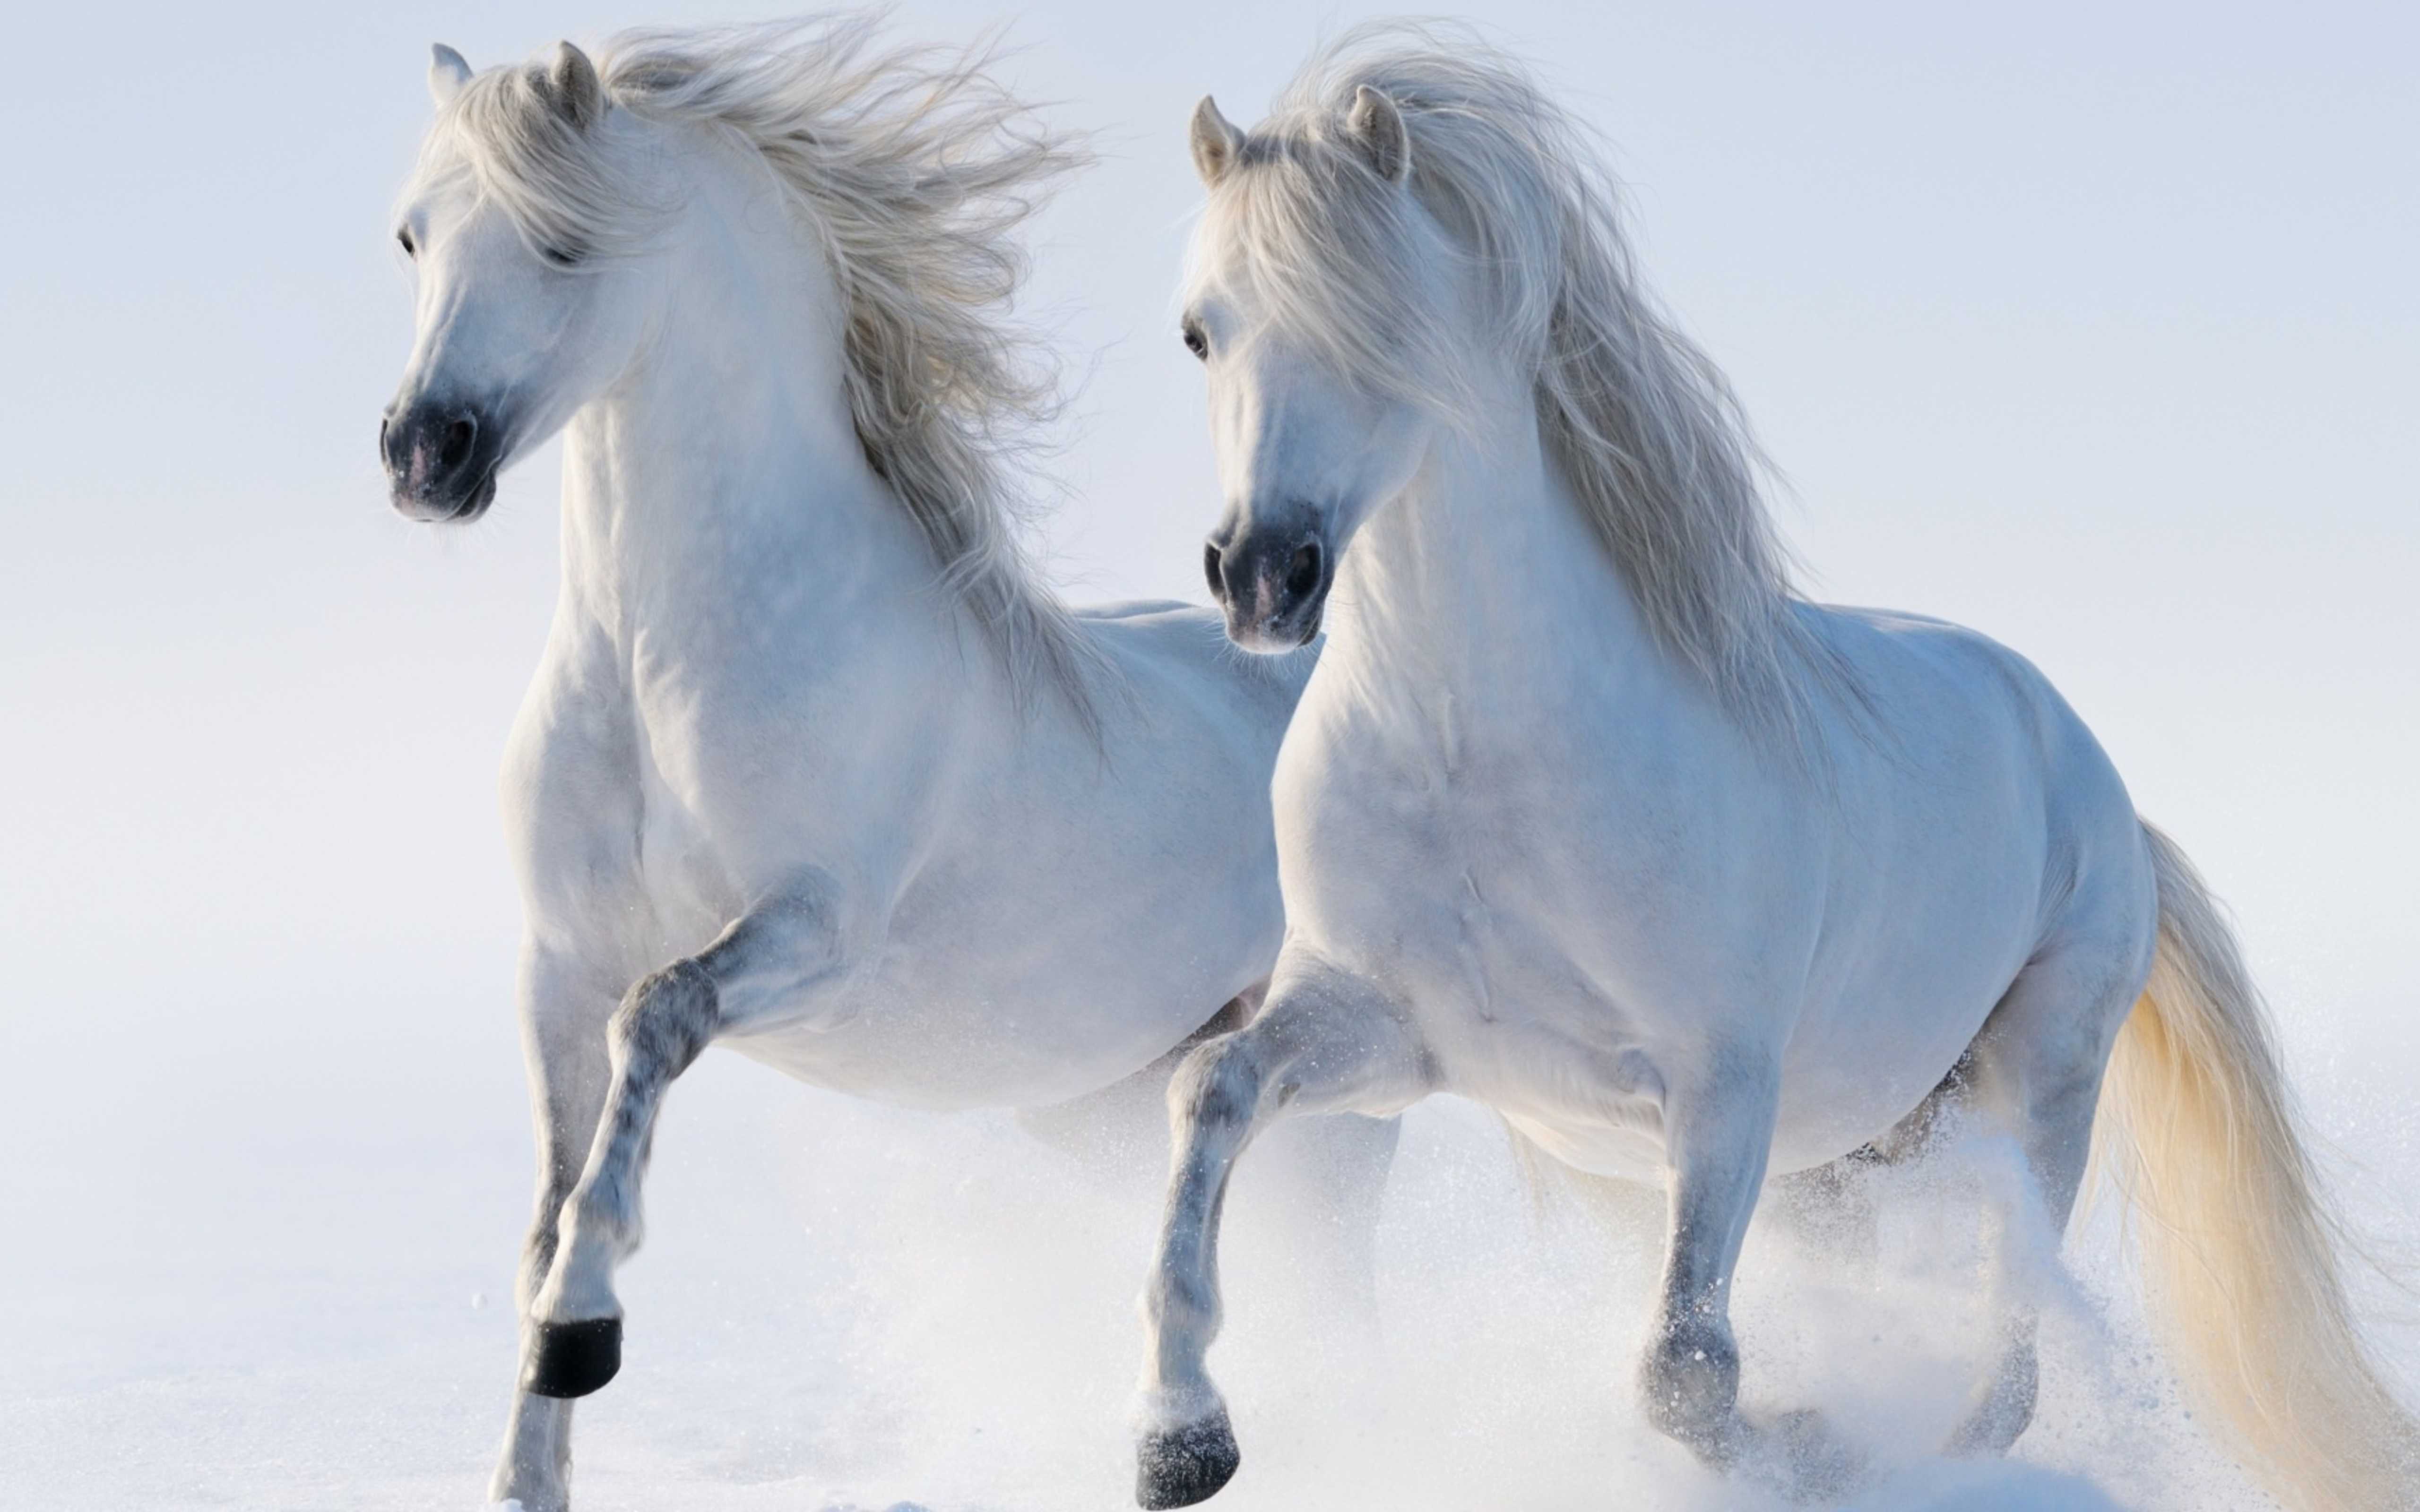 White Horse Walking In The Snow Wallpaper 5120x3200 : Wallpapers13.com